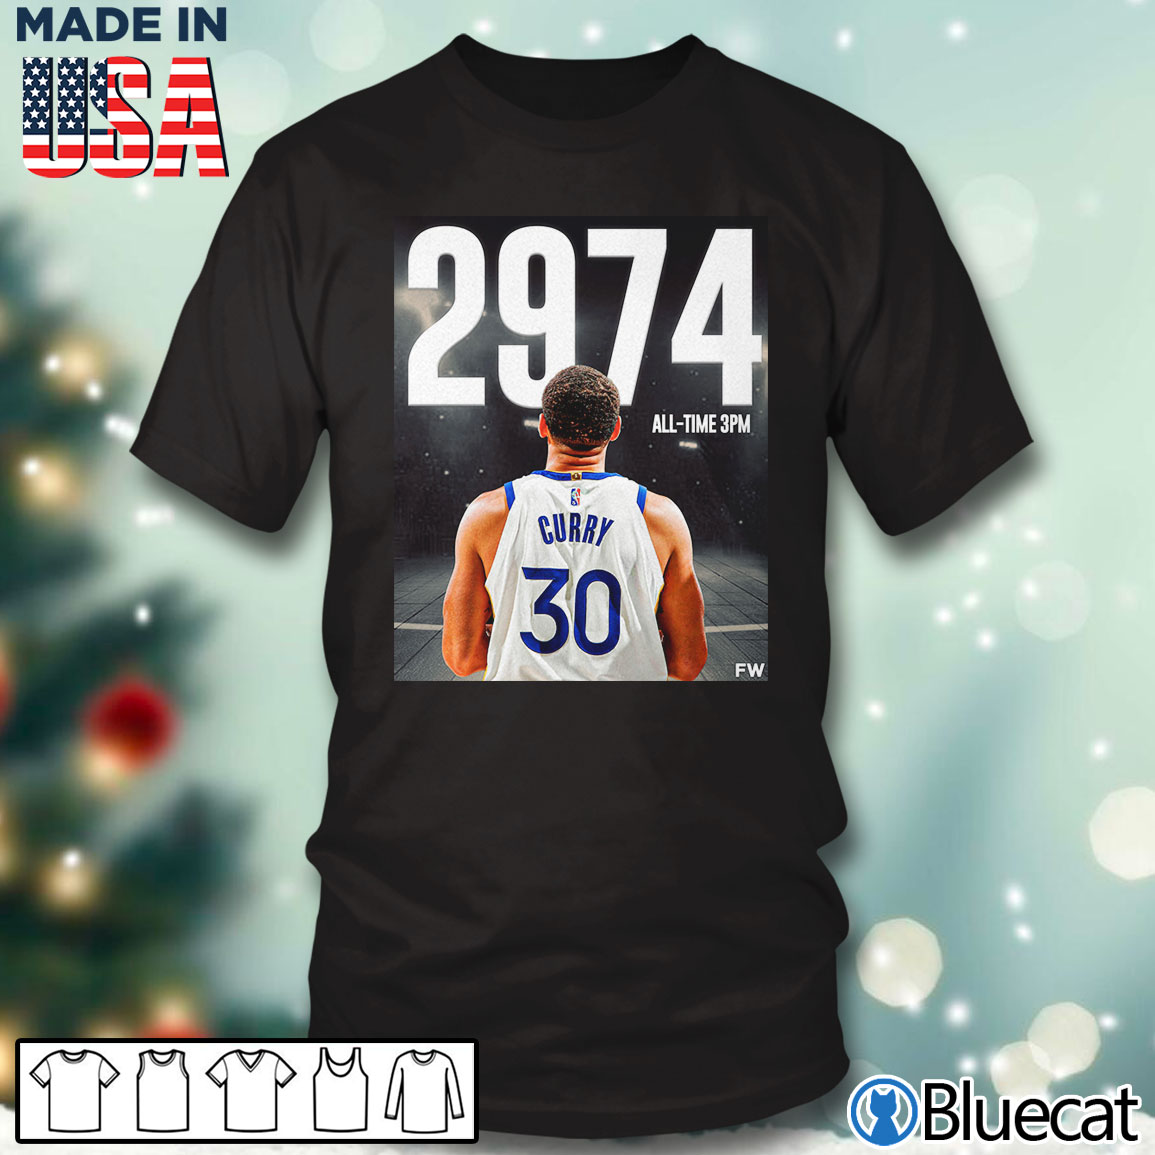 steph curry merchandise